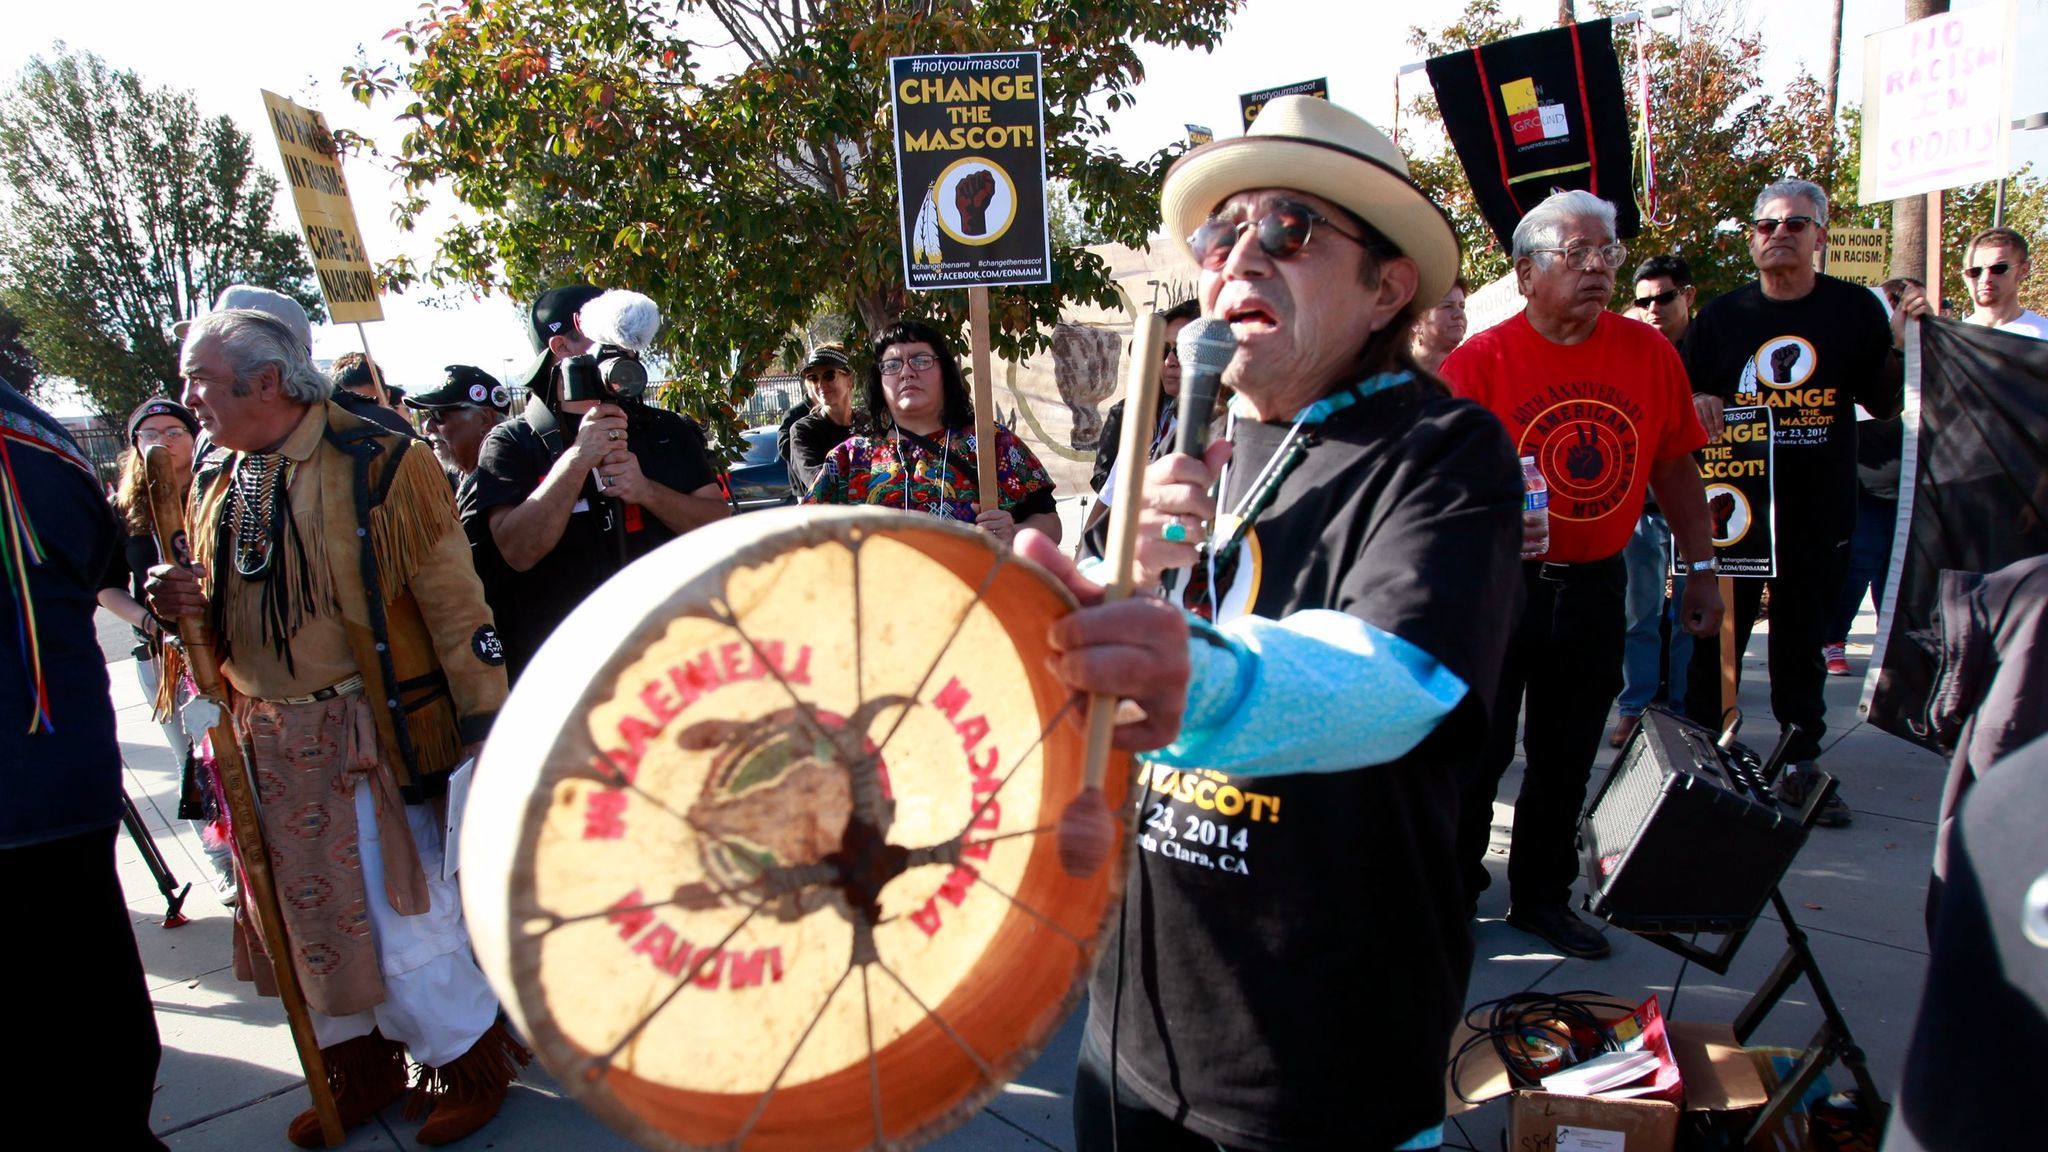   Washington Redskins "title =" Washington Redskins "/> 
 
<figcaption> Tony Gonzalez leads a protest in Santa Clara in 2014 against the use of" Redskins "as team mascot. <span clbad=